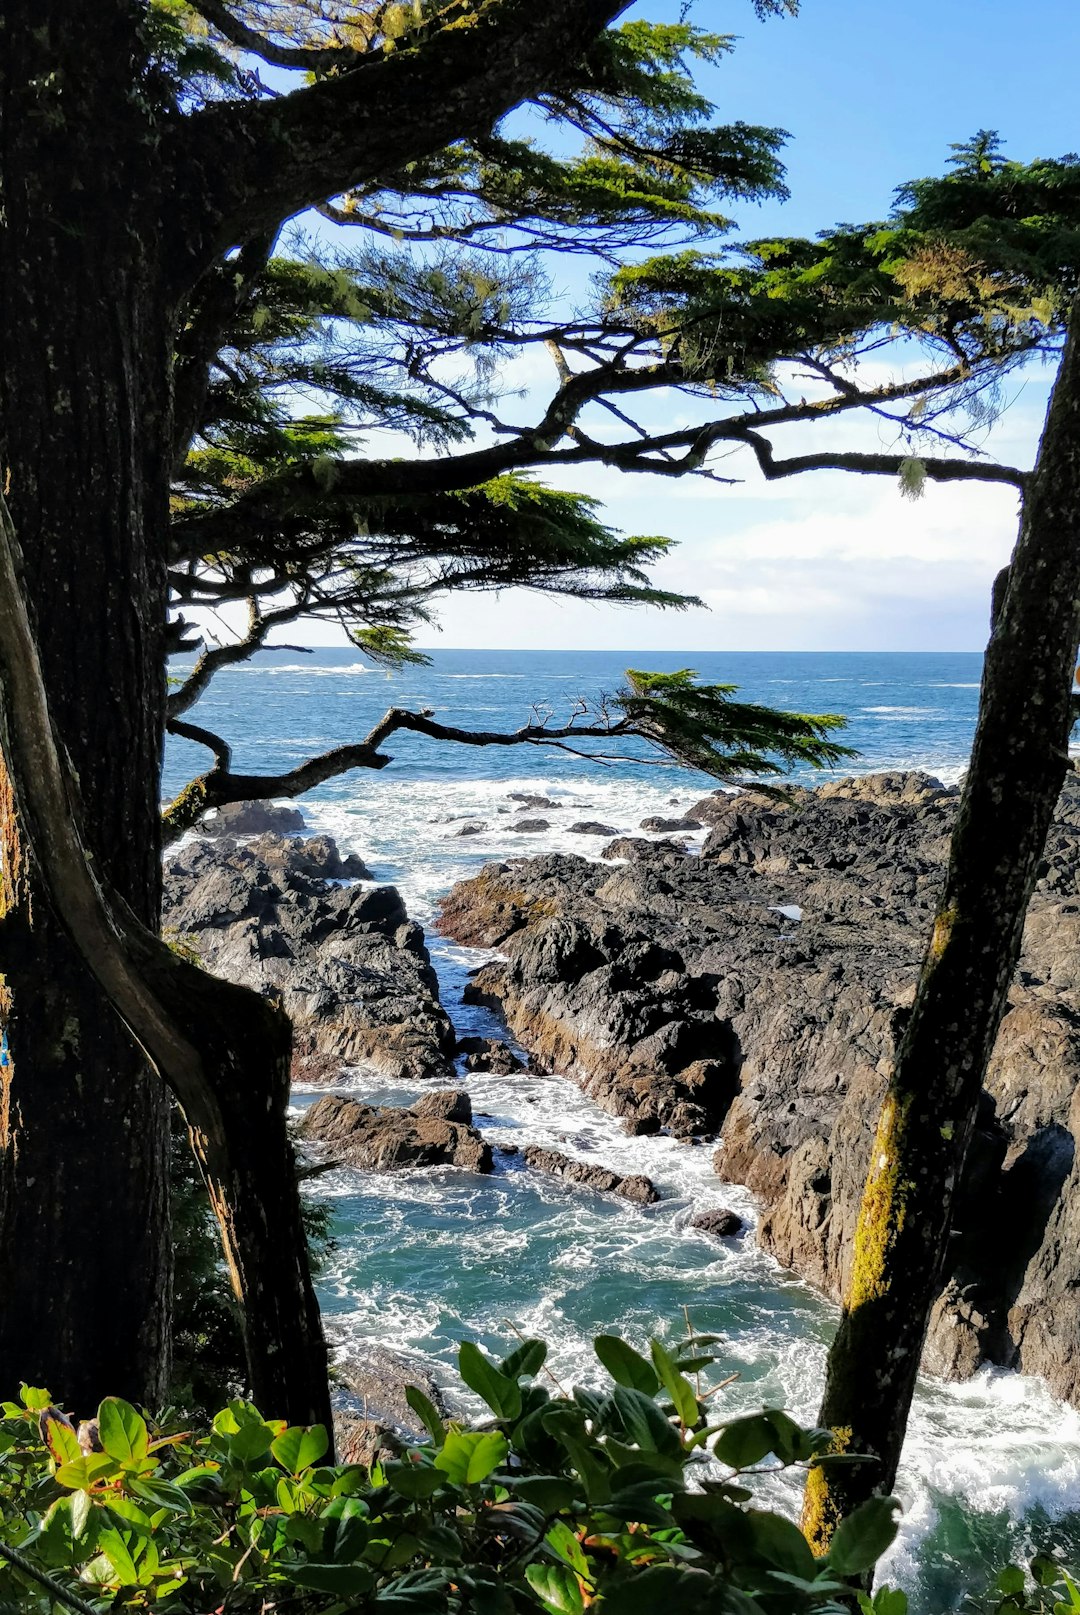 Travel Tips and Stories of Ucluelet in Canada